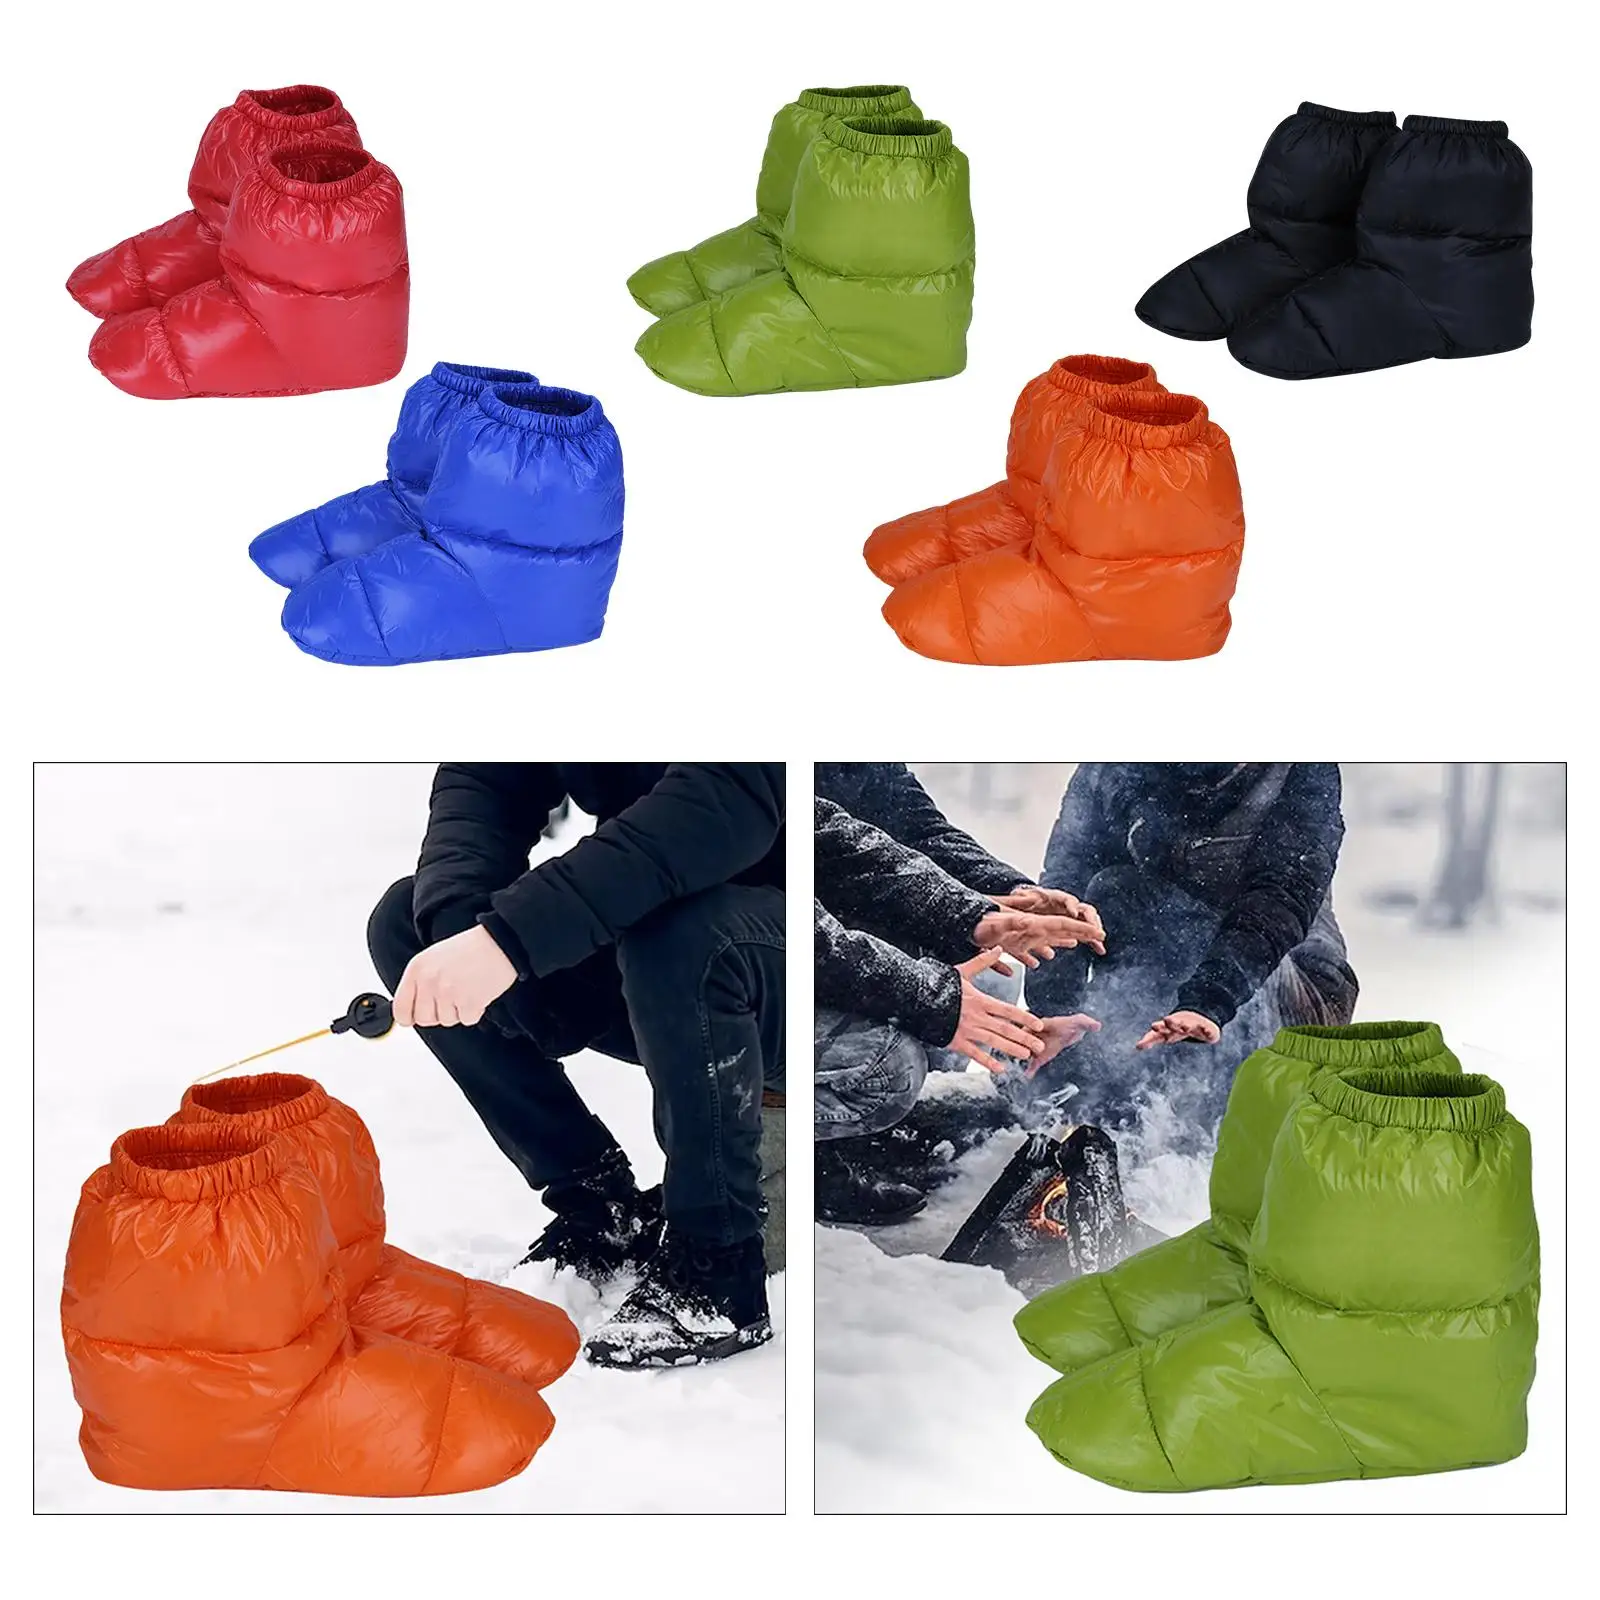 1 Pair Winter Down Slippers Warm Bootie Shoes Comfortable Ultralight Ankle Snow Boots for Bedroom Fishing Hiking Office Skiing